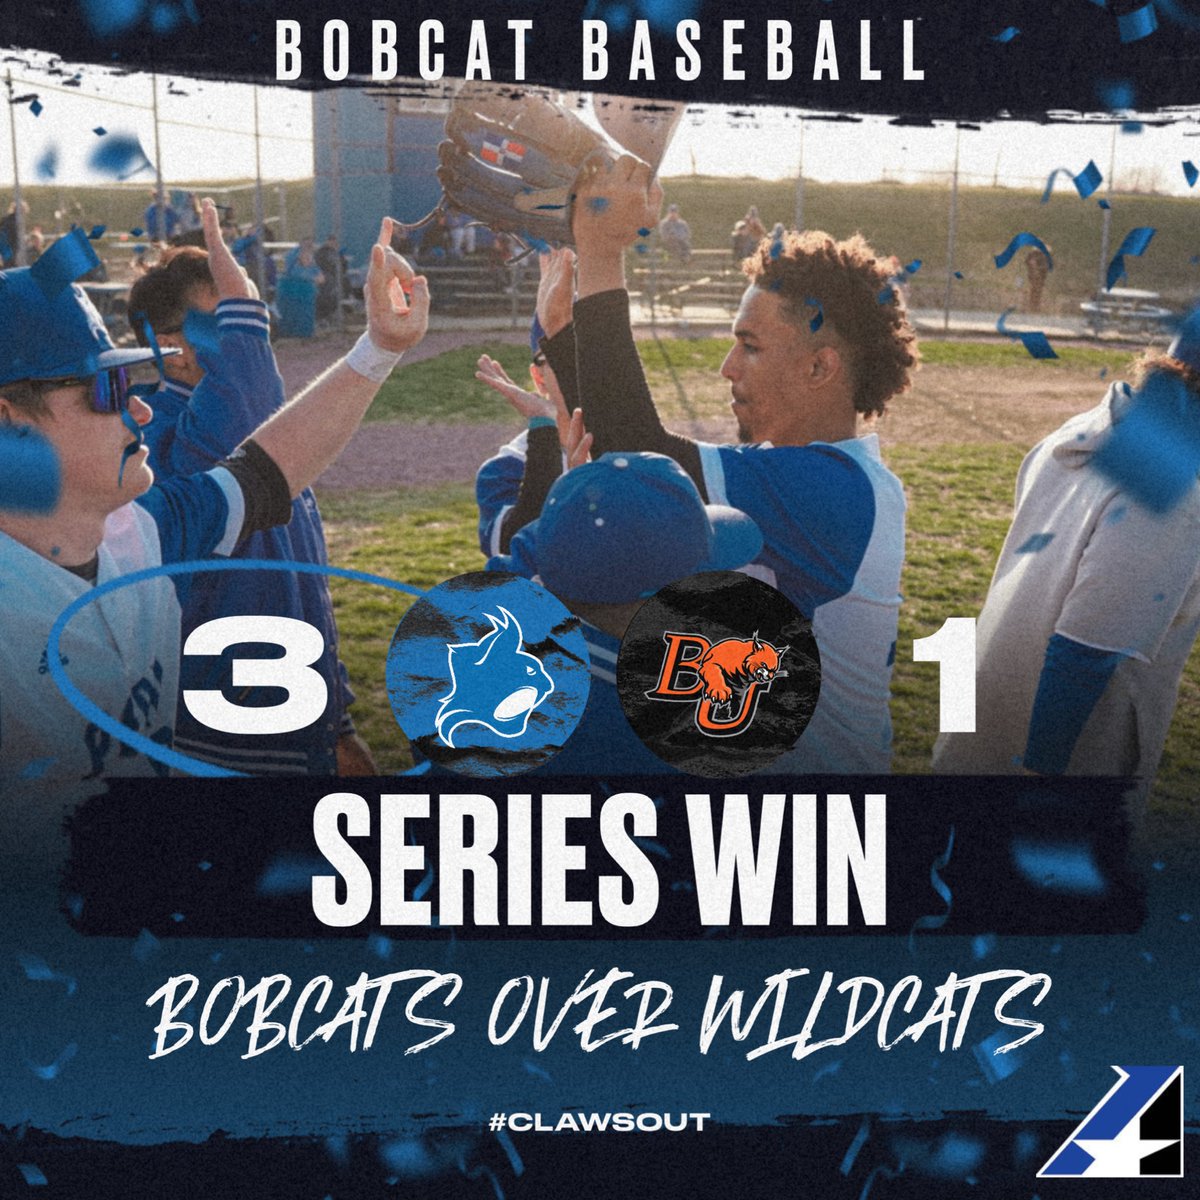 ‼️‼️WIN WIN WIN‼️‼️ Big weekend for the Bobcats as they take 3 of 4 to win the series in the HOAC matchup!